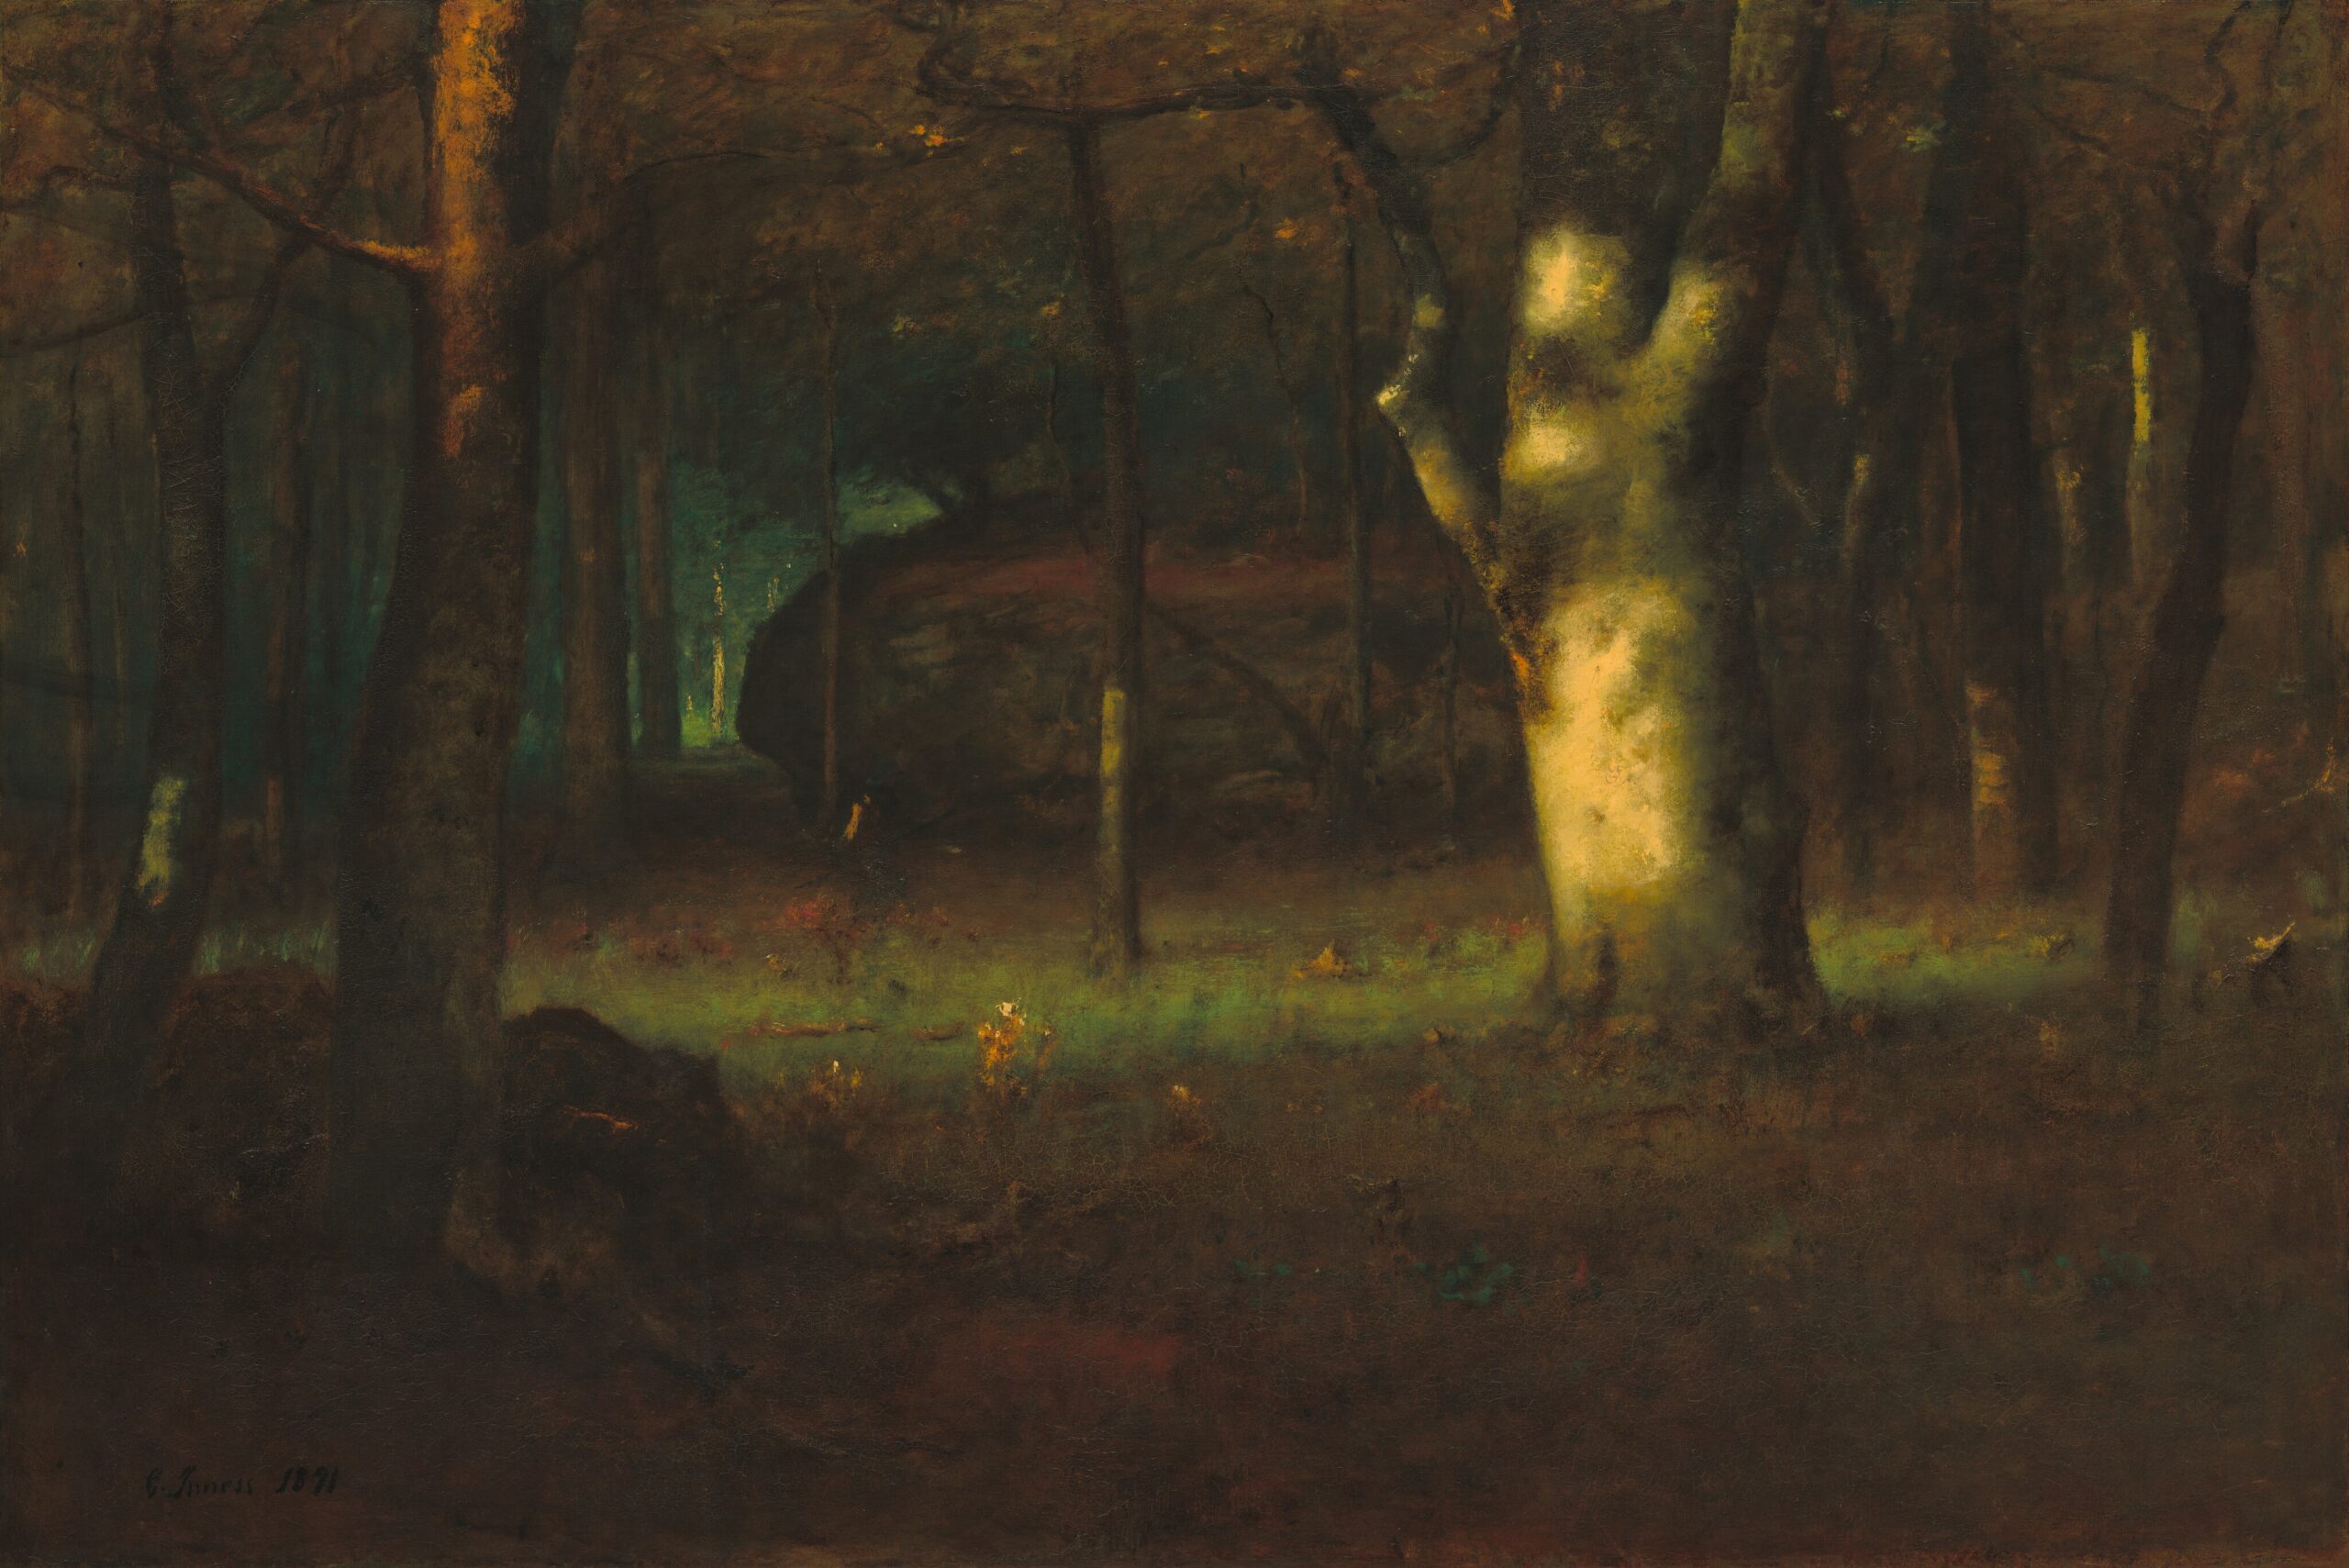 "Sunset in the Woods" by George Inness